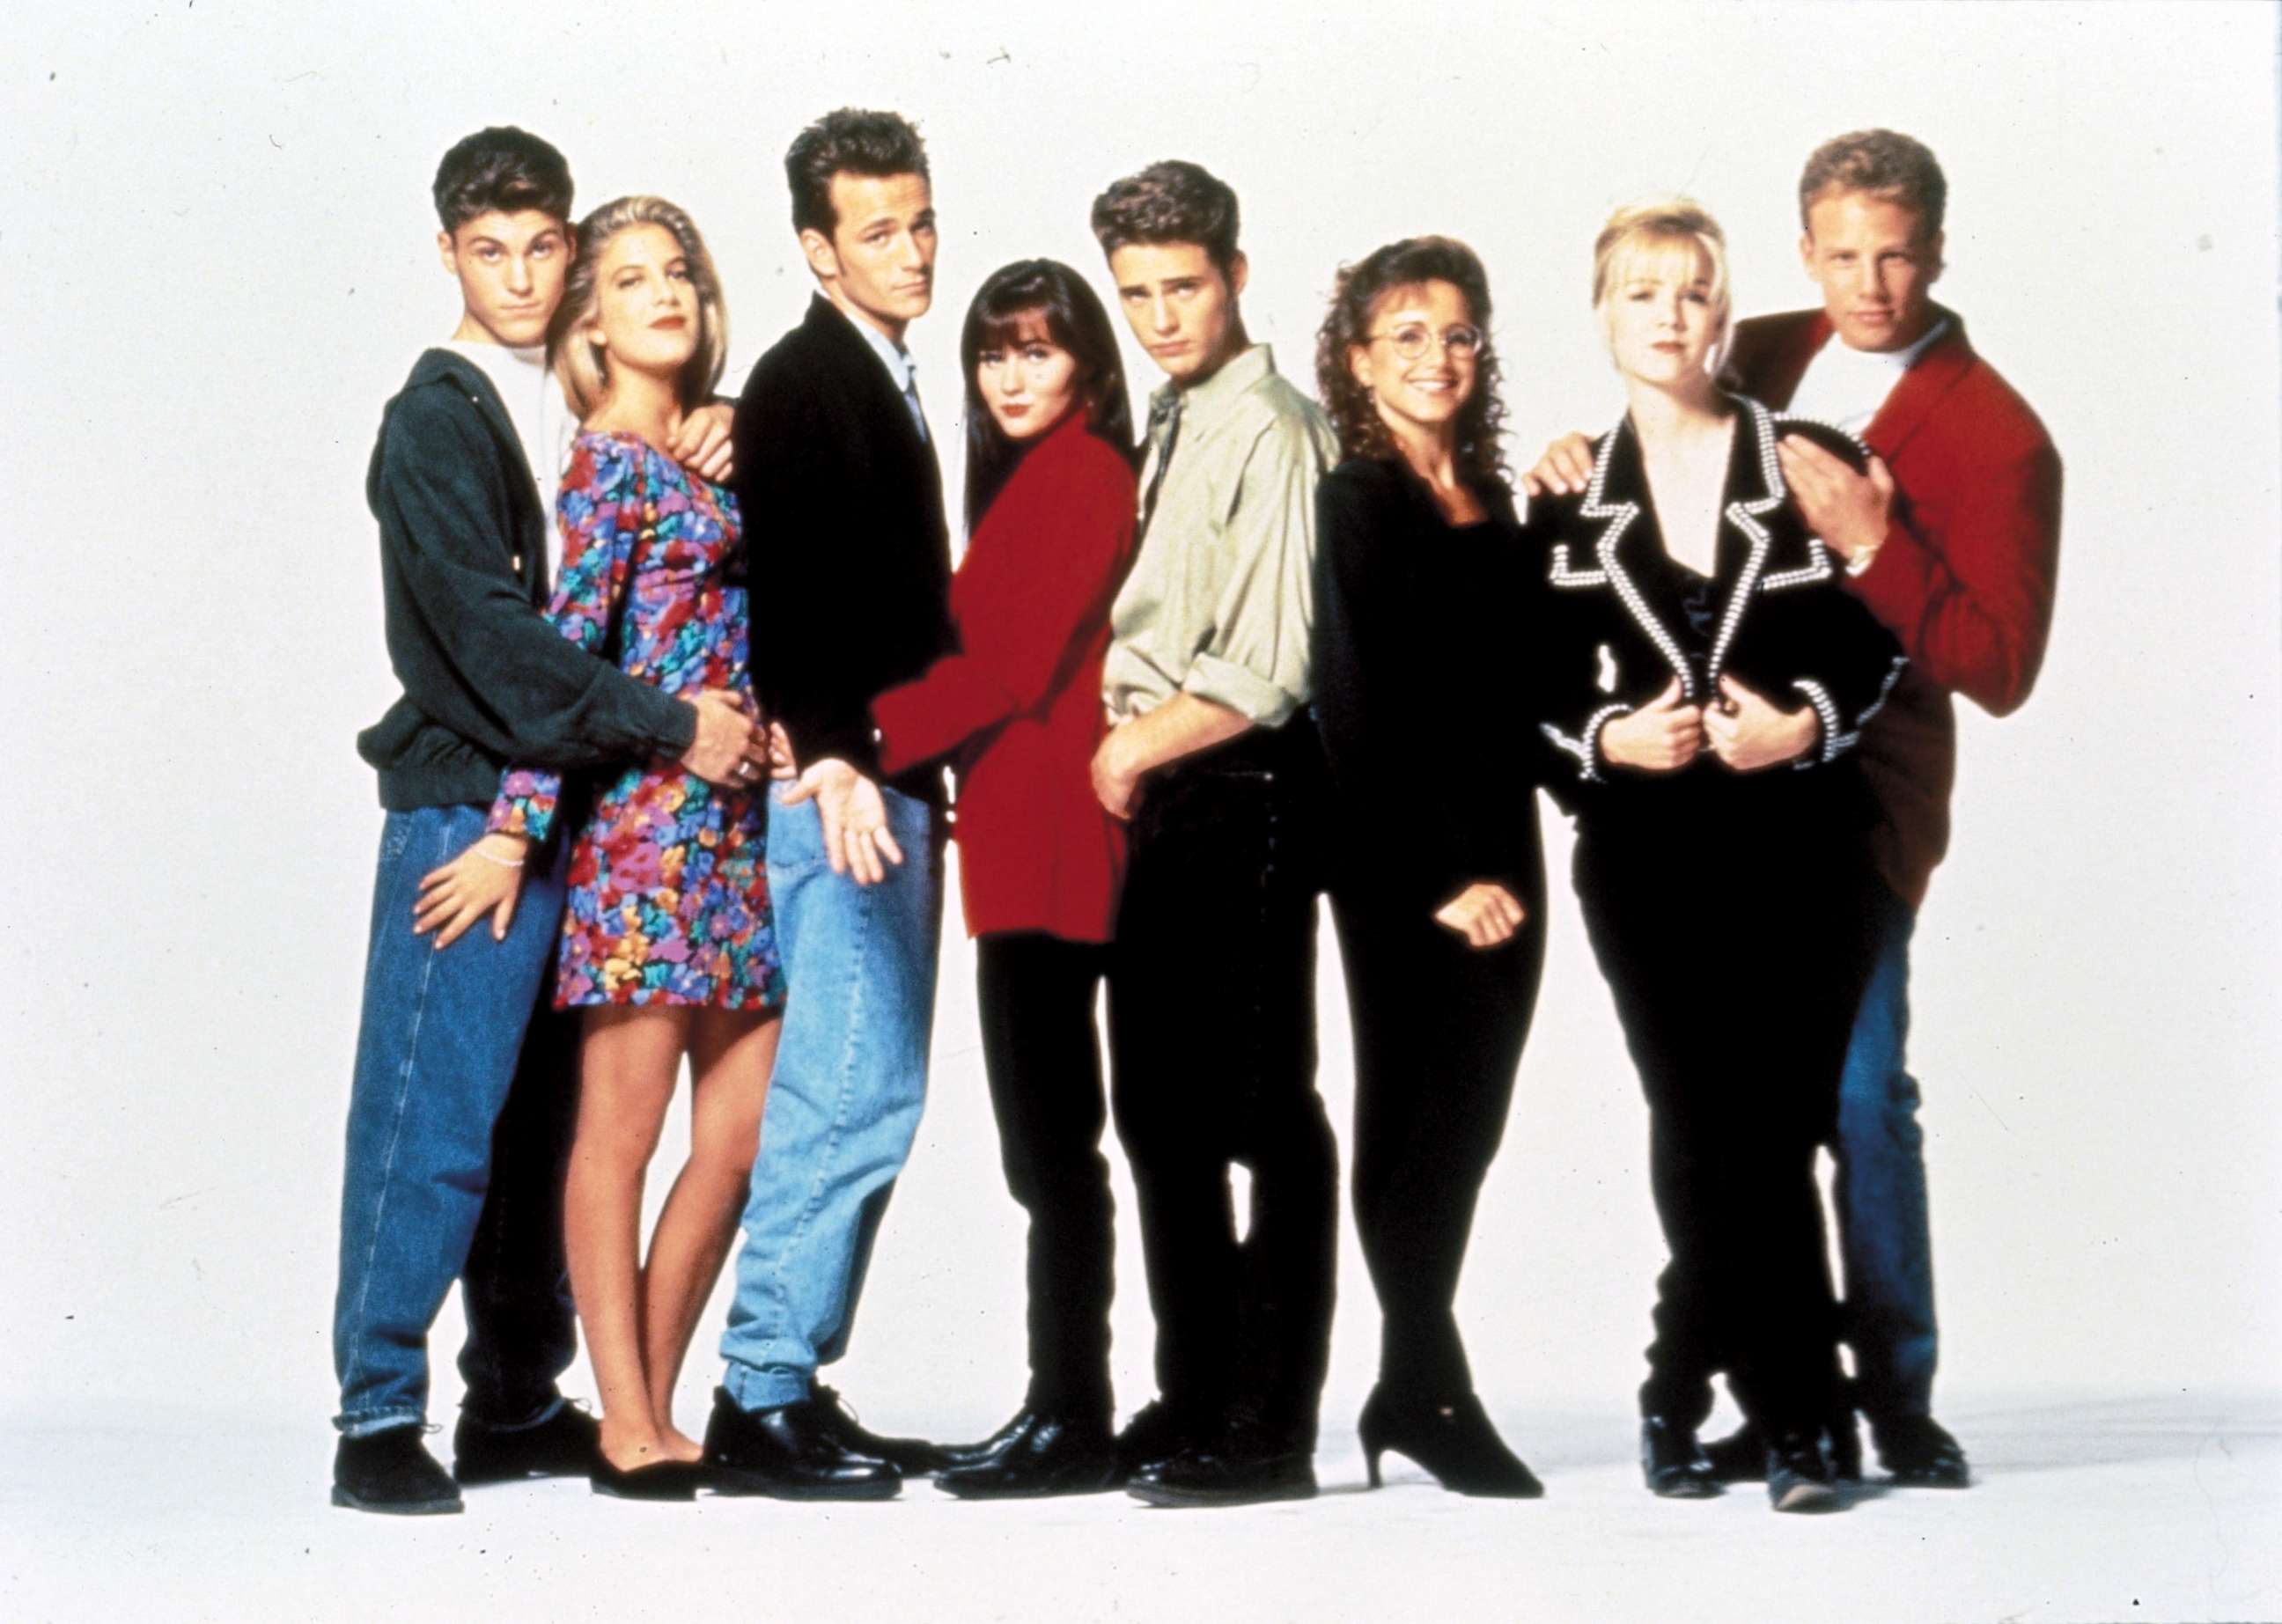 PHOTO: The cast of Beverly Hills 90210.